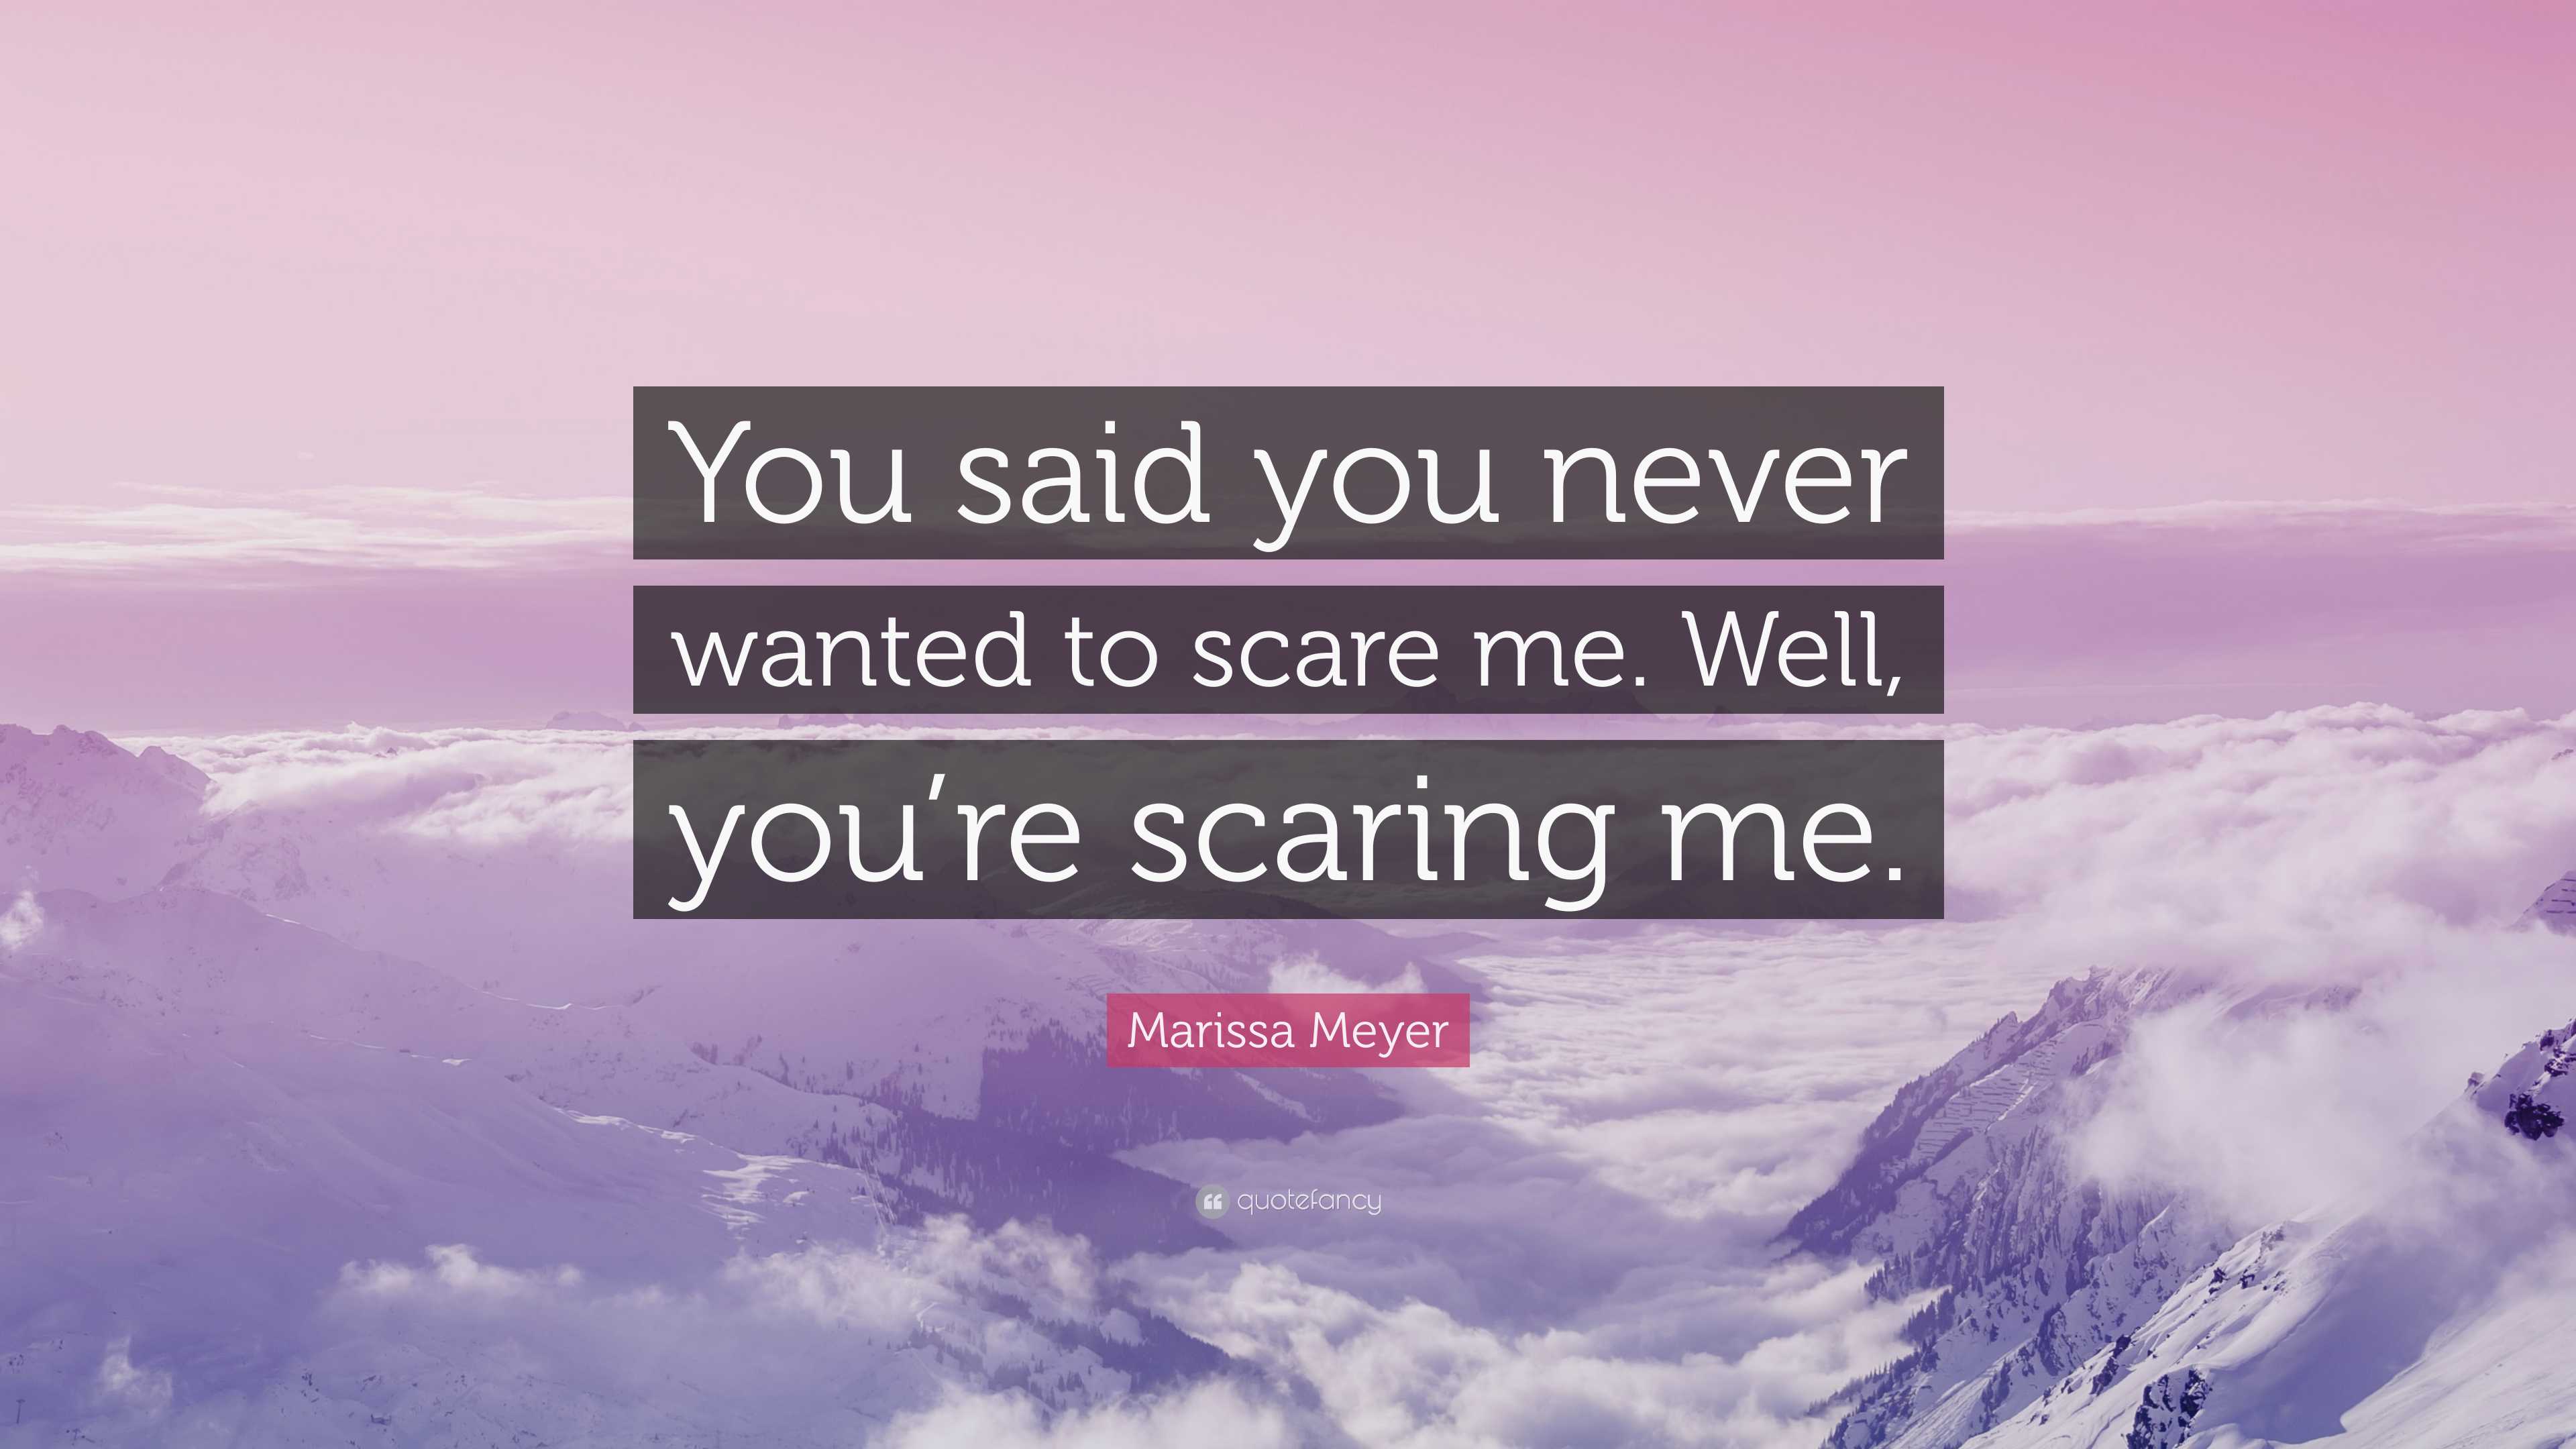 Marissa Meyer Quote: “You said you never wanted to scare me. Well, you ...